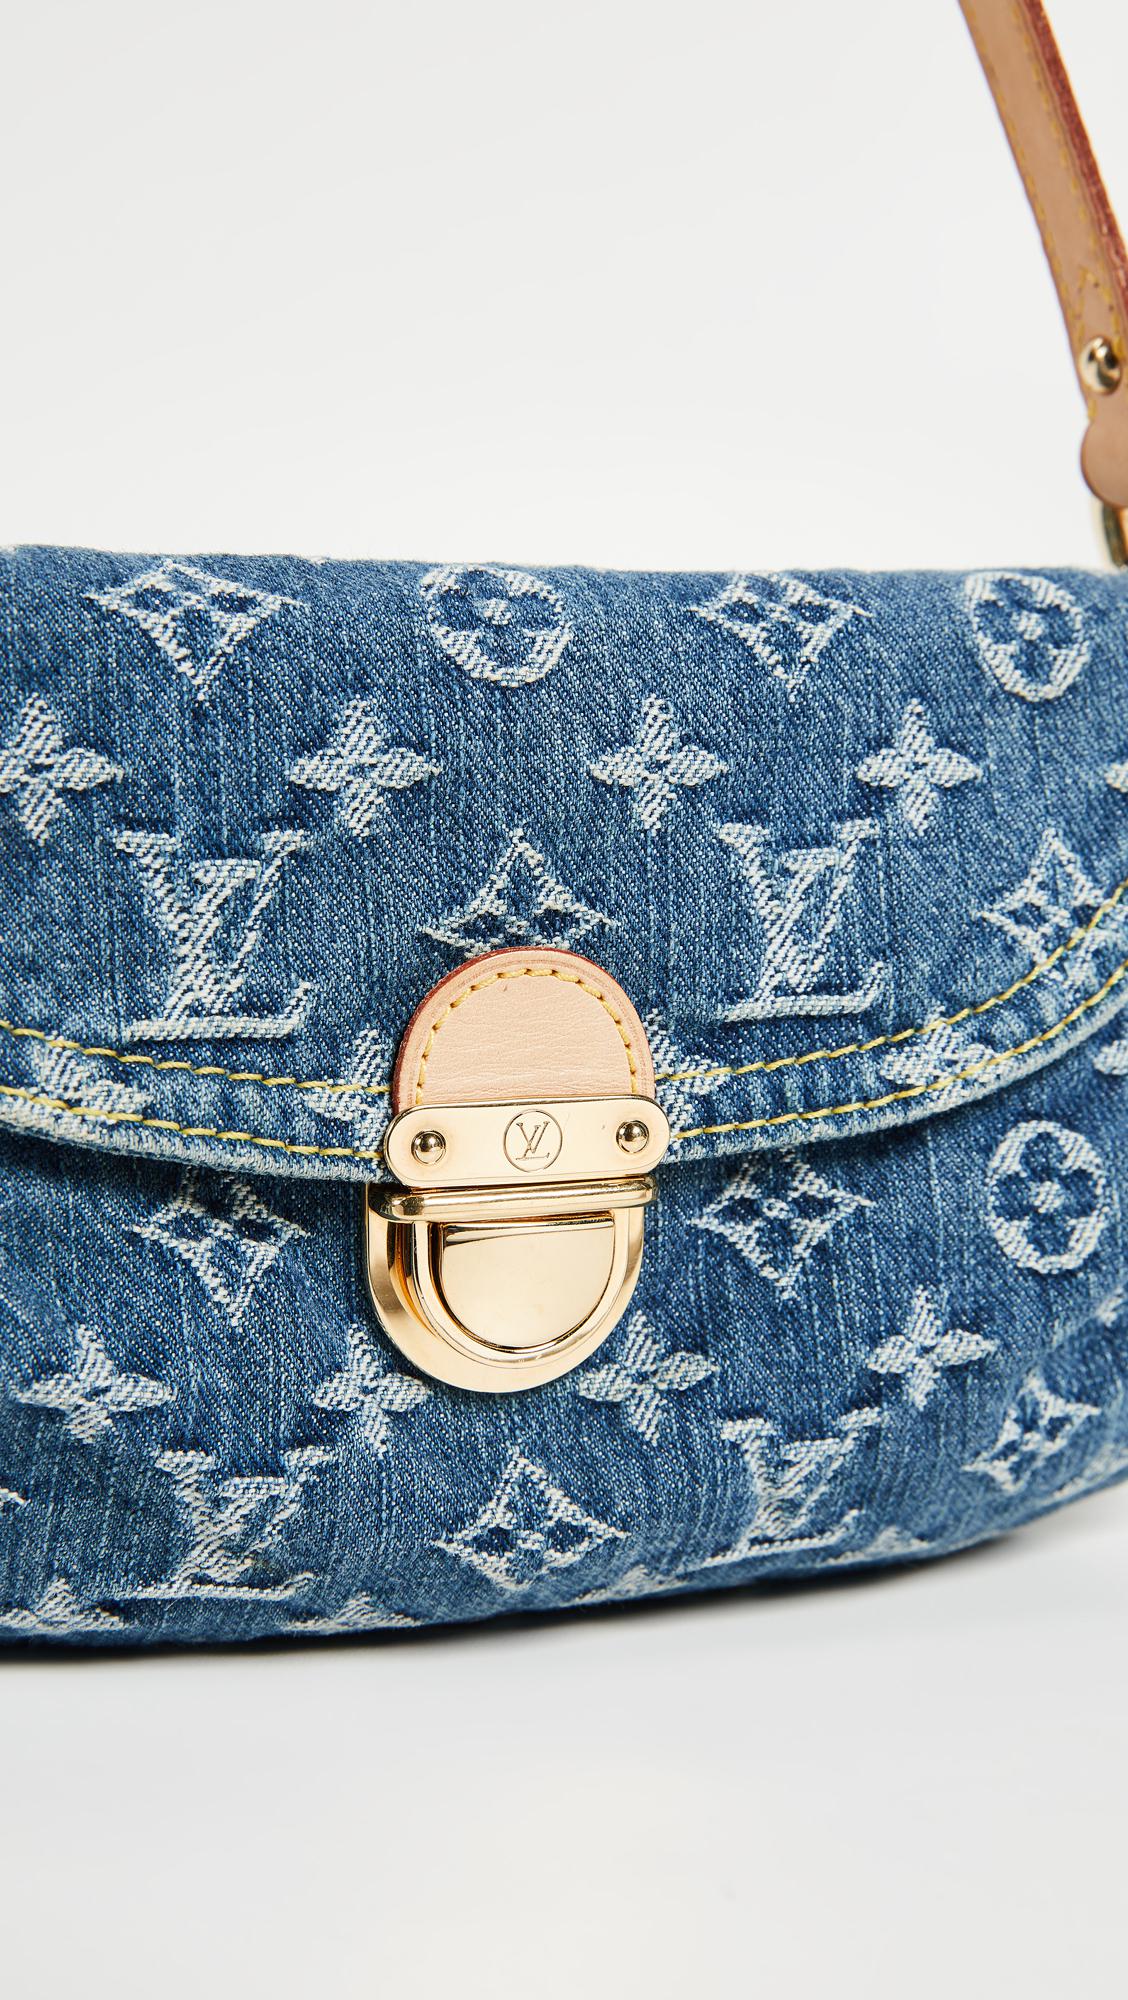 I've searched everywhere for this Louis Vuitton Pleaty Denim Purse